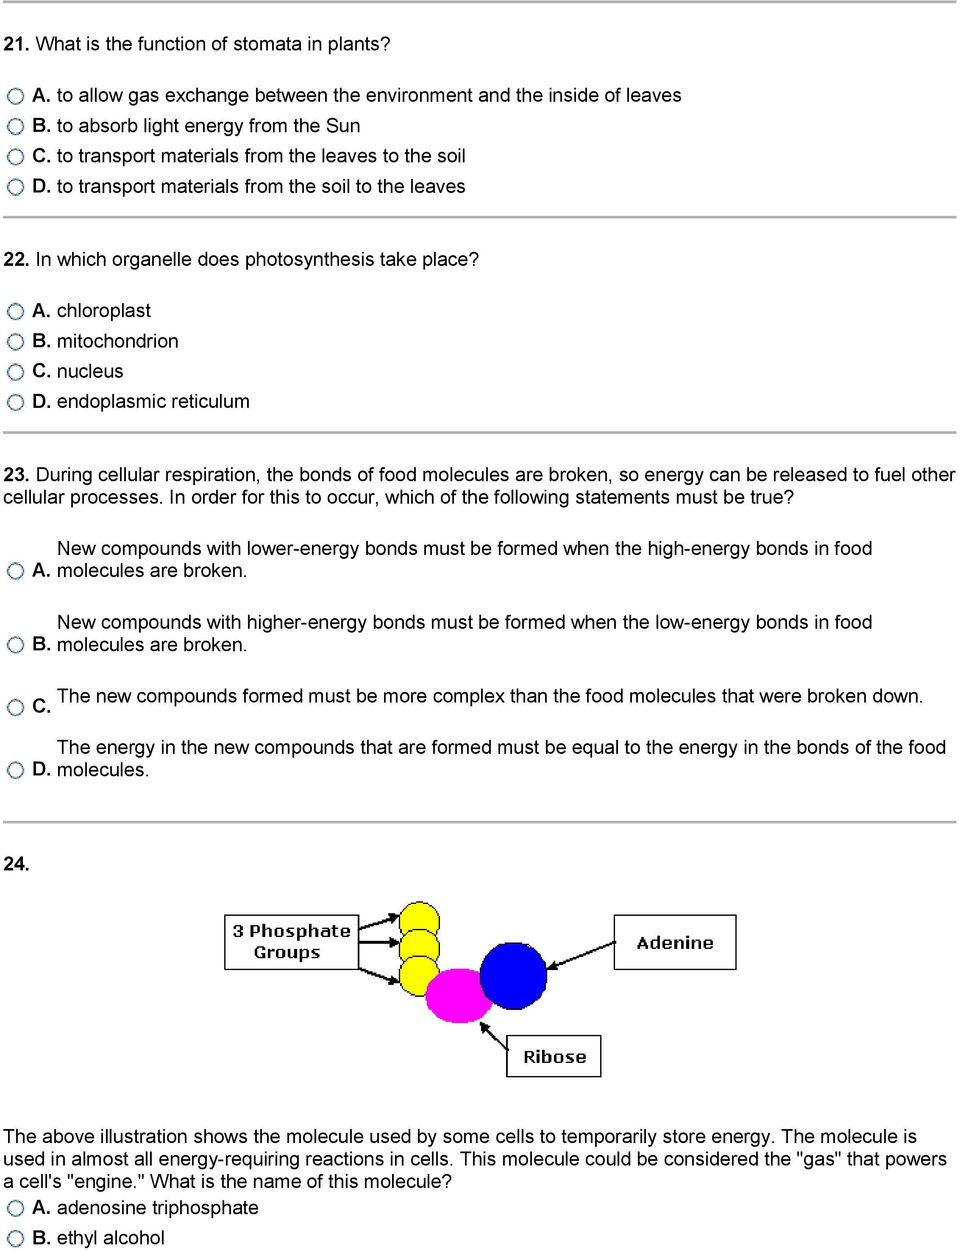 Venn Diagram Of Photosynthesis And Cellular Respiration Photosynthesis And Cellular Respiration Worksheet Luxury